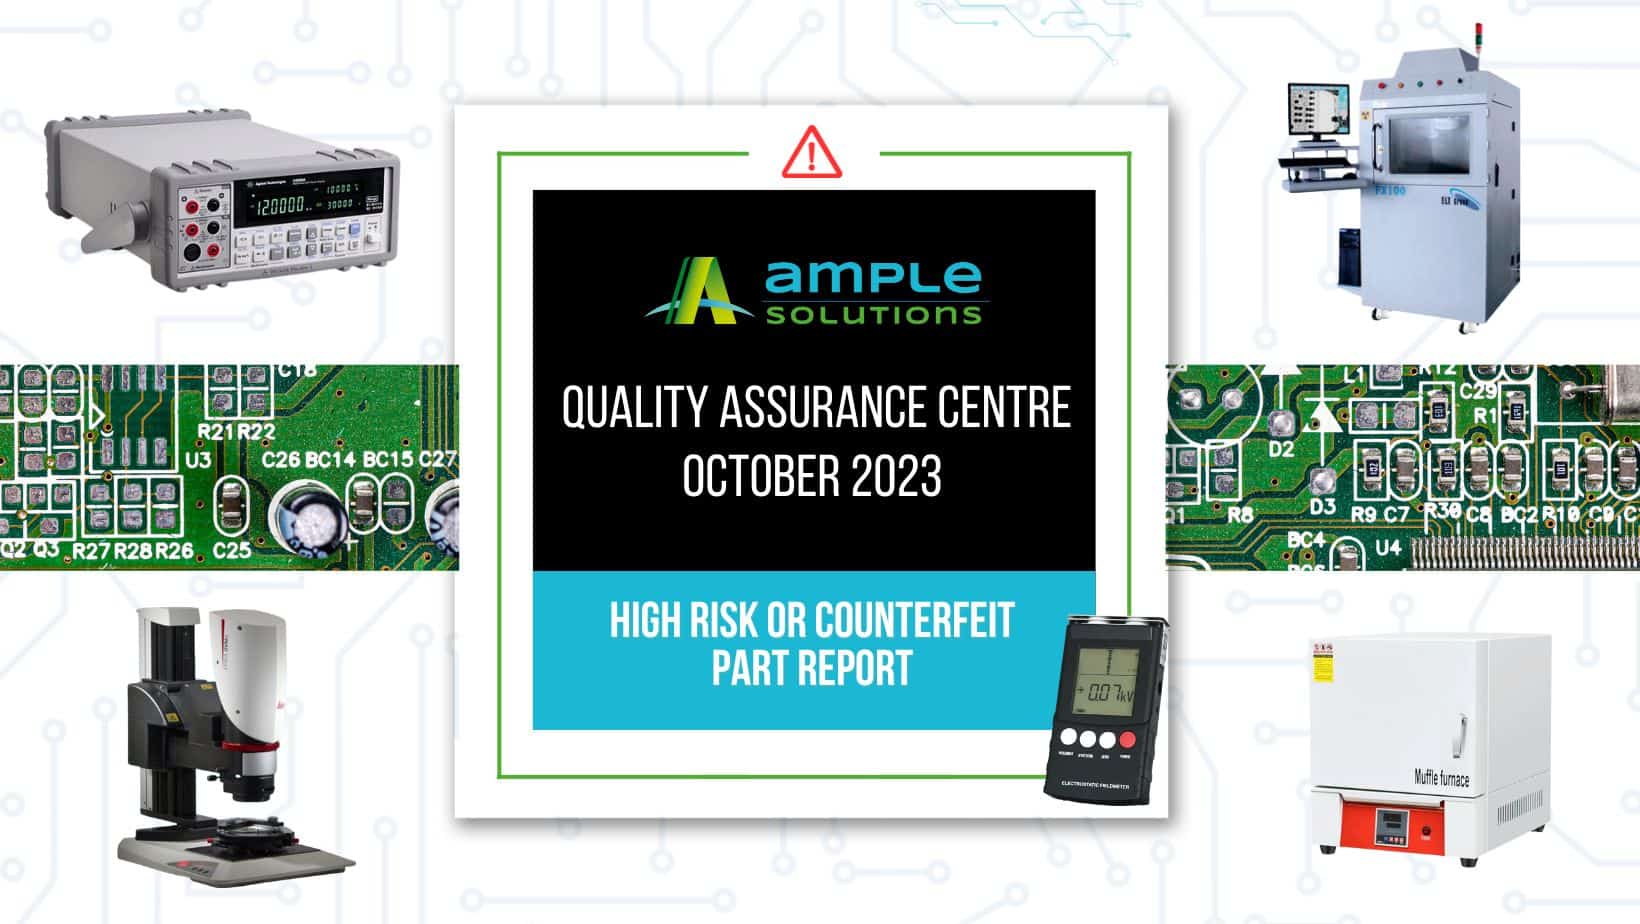 High-risk or Counterfeit Electronic Components: Ample Solutions Quality Assurance Centre October 2023 Report